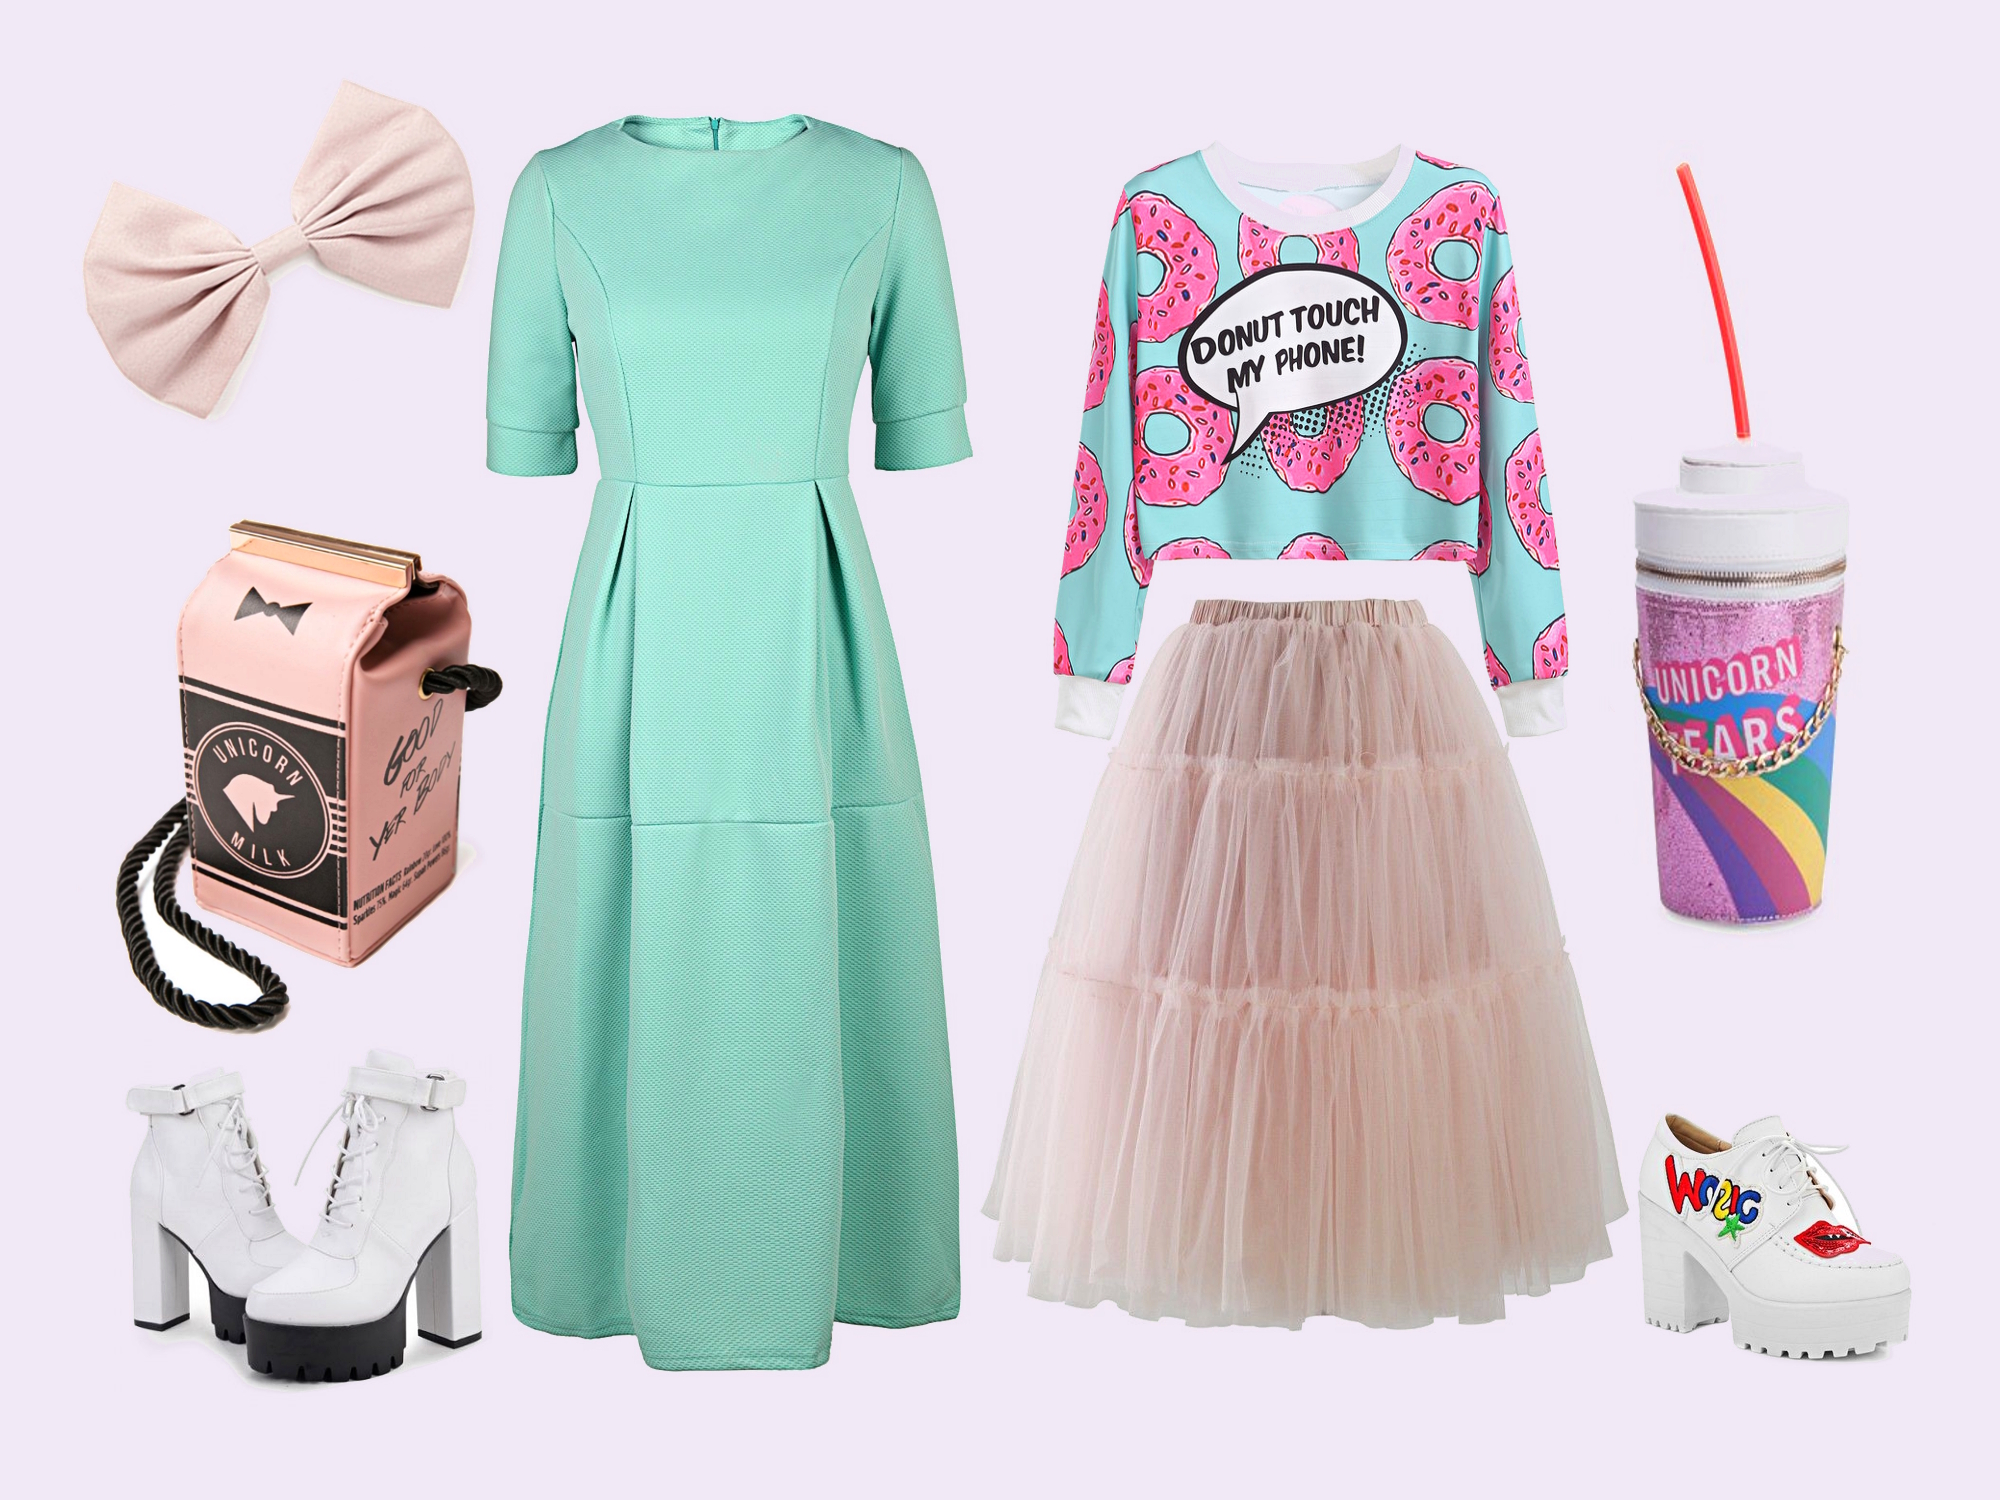 fashion collage with clothing inspired by Melanie Martinez fashion style